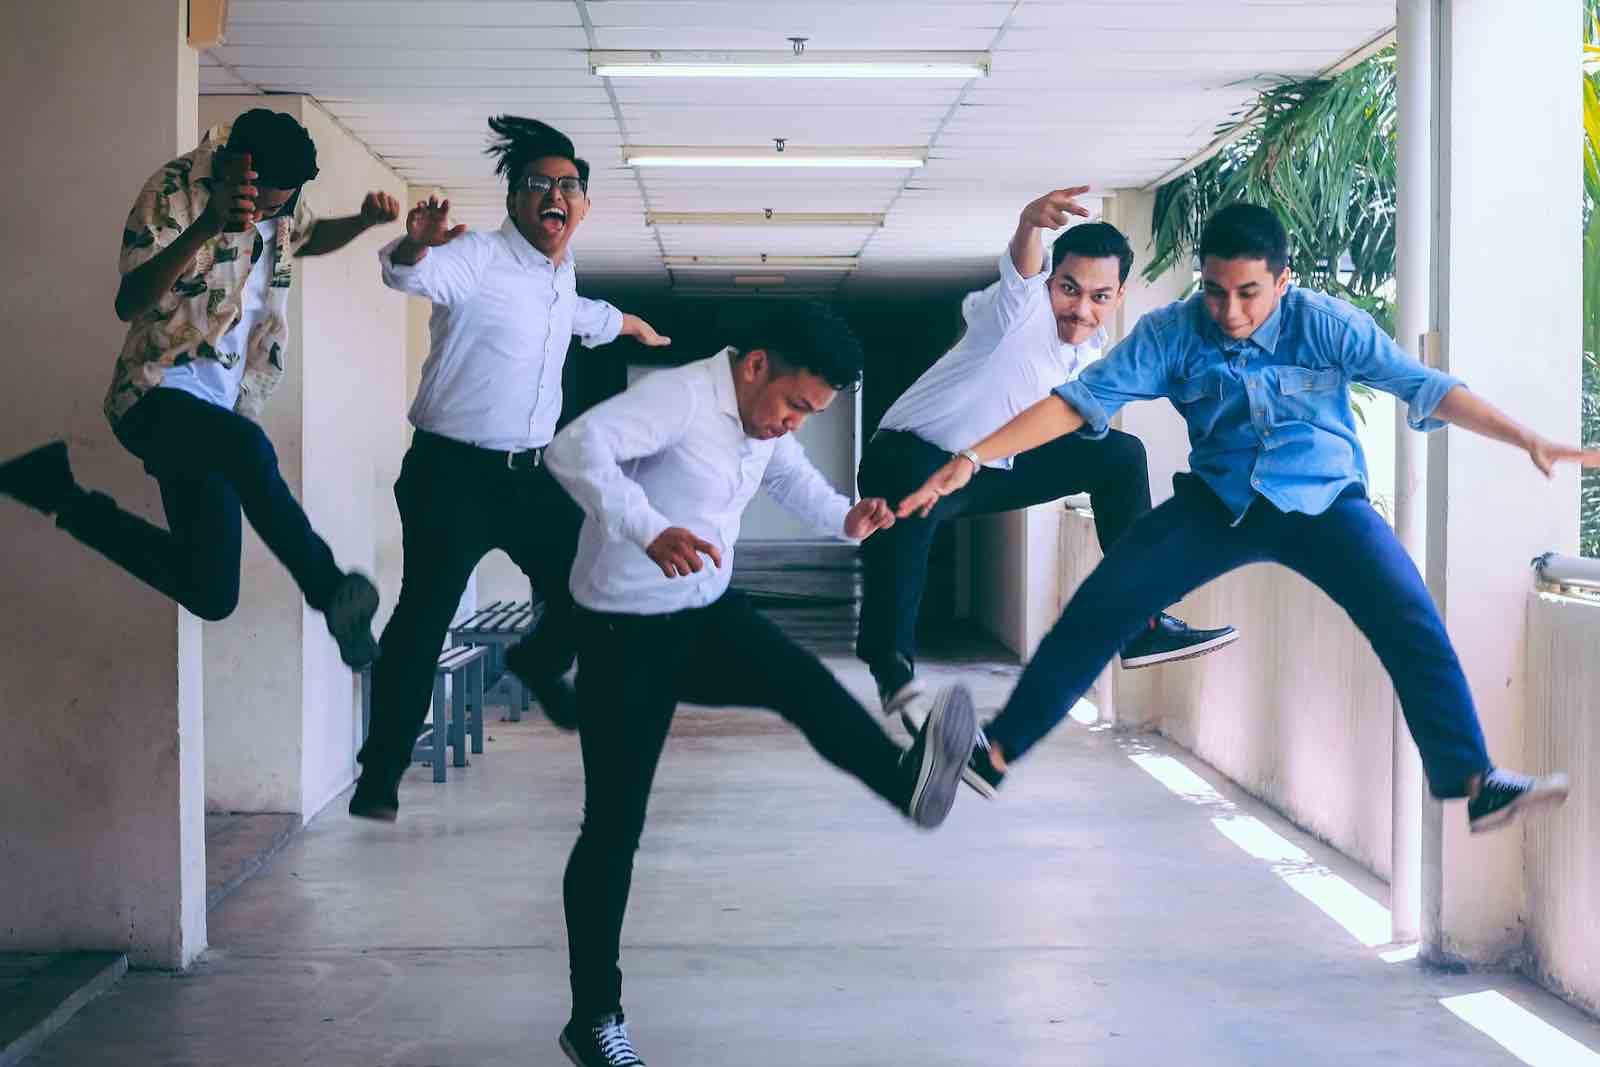 Employees jumping for joy